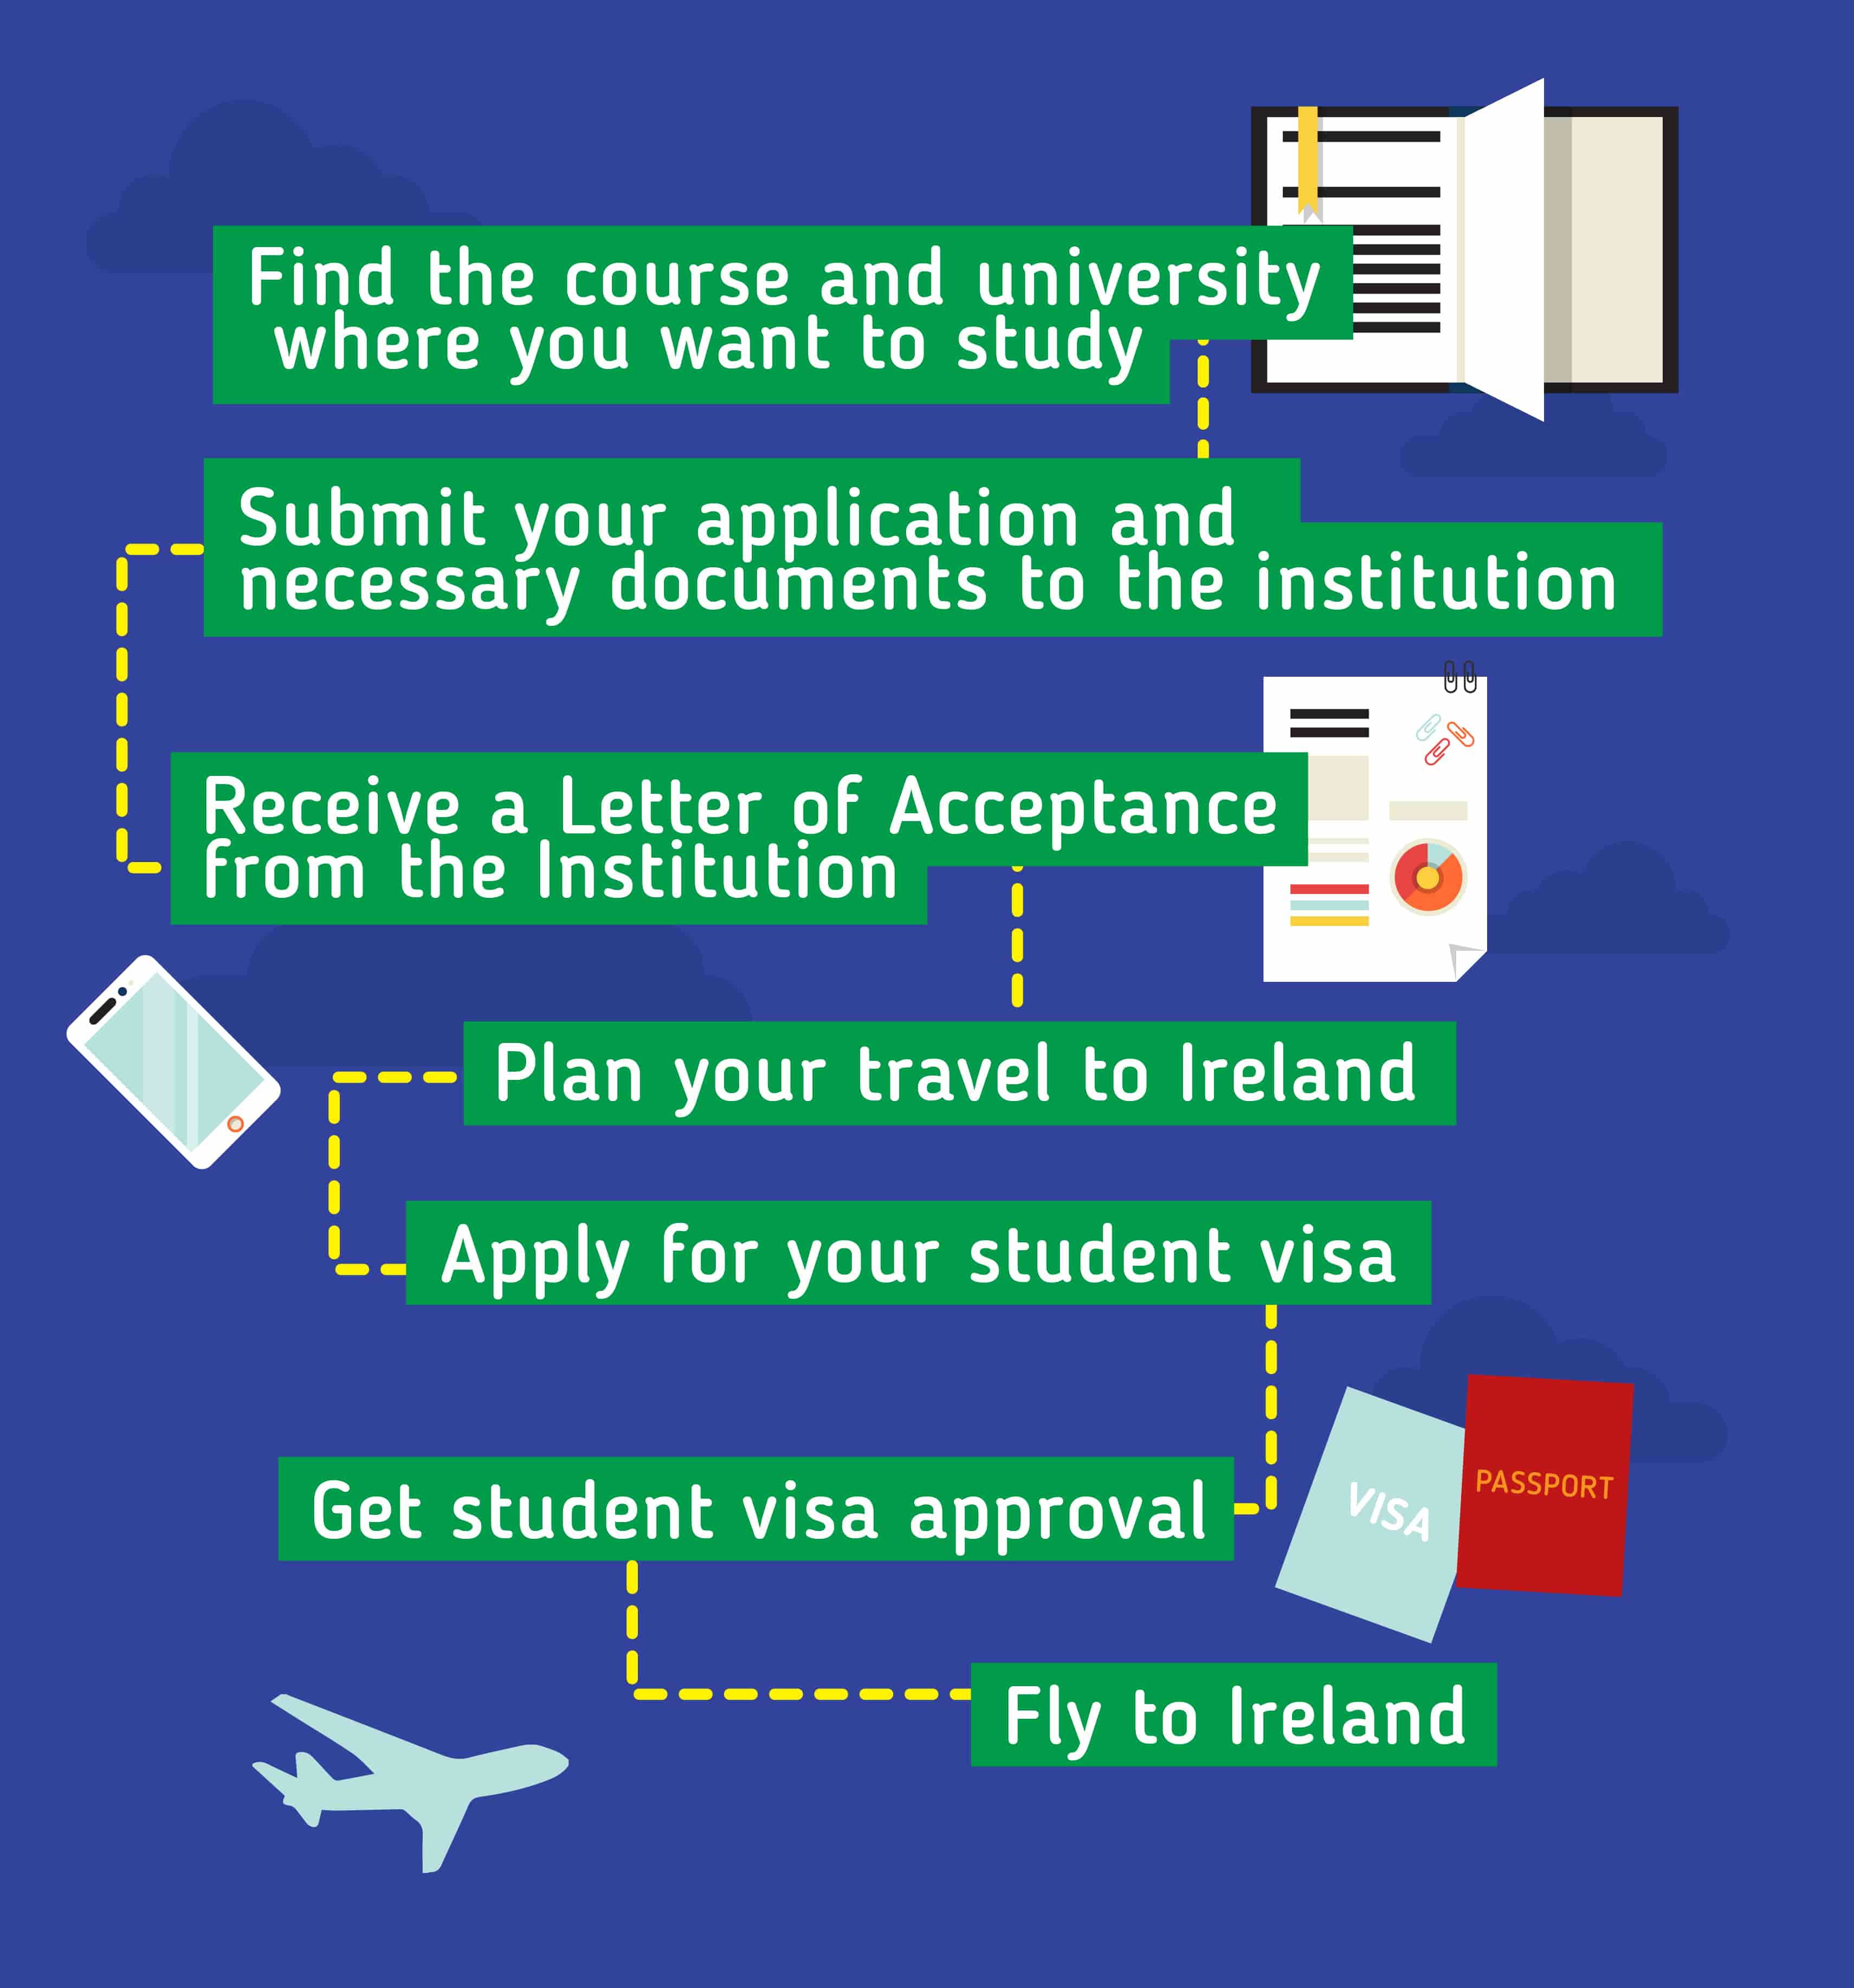 Applying to Study in Ireland: Find the course and university where you want to study - Submit your application and necessary documents to the institution - Receive a letter of acceptance rom the institution - Plan your travel to Ireland - Apply for your student visa 